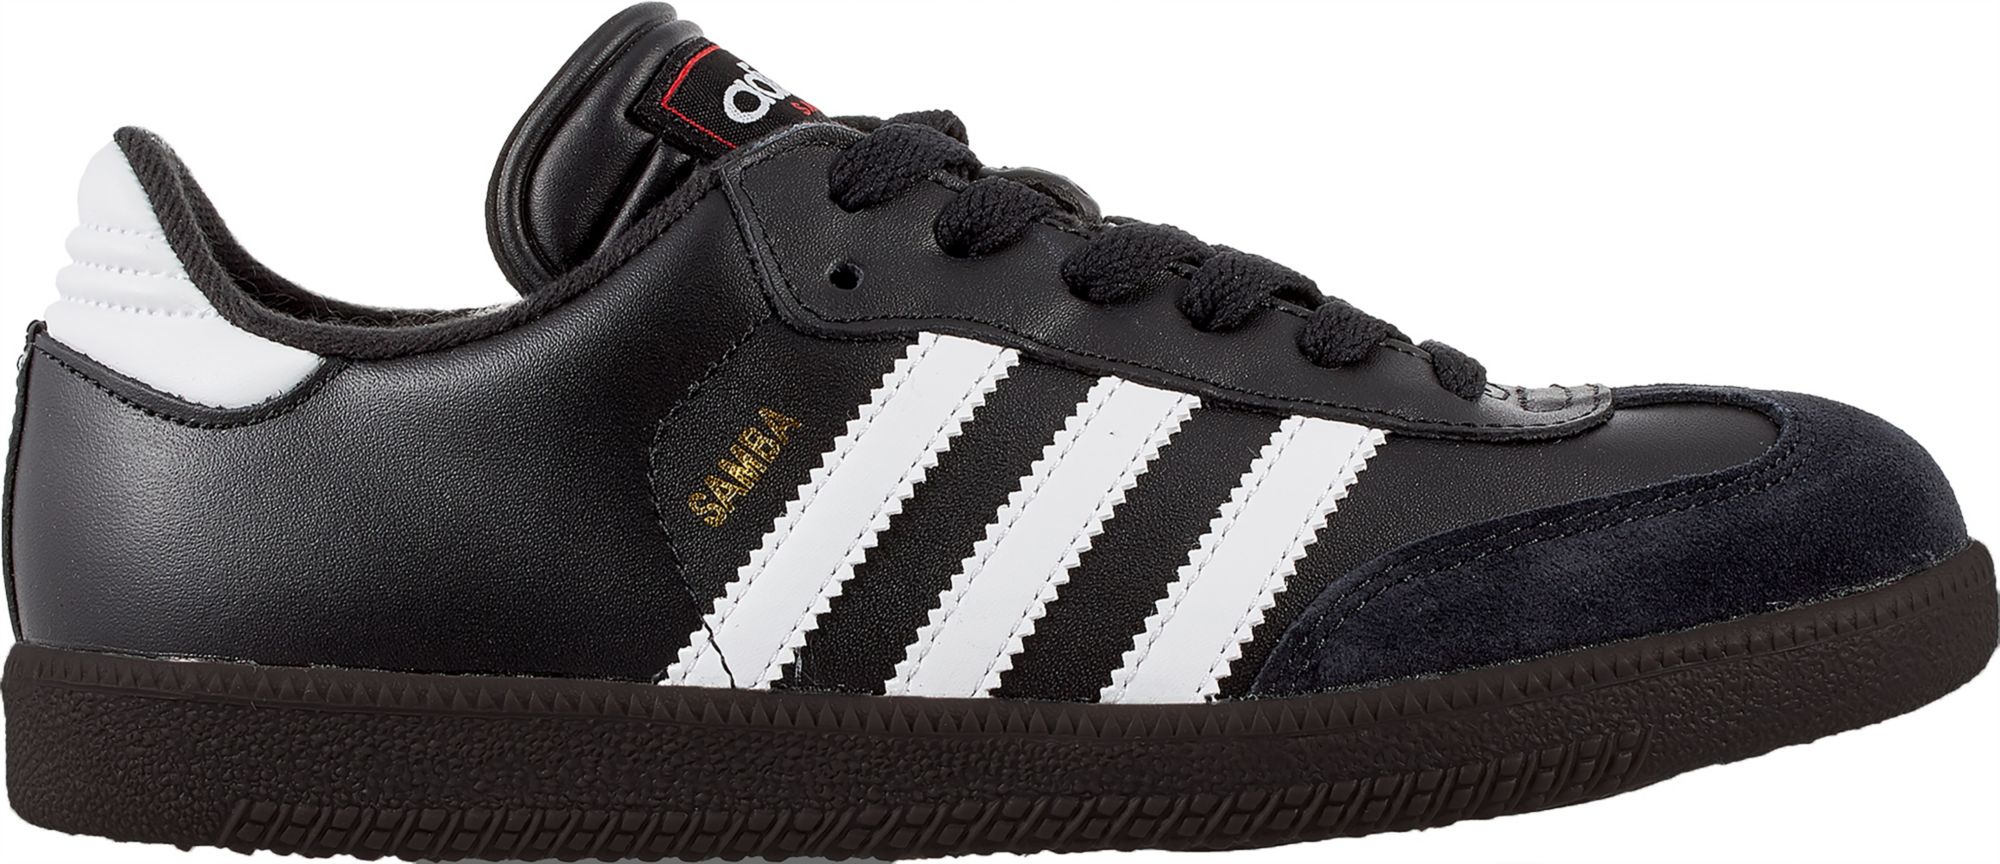 adidas leather indoor soccer shoes